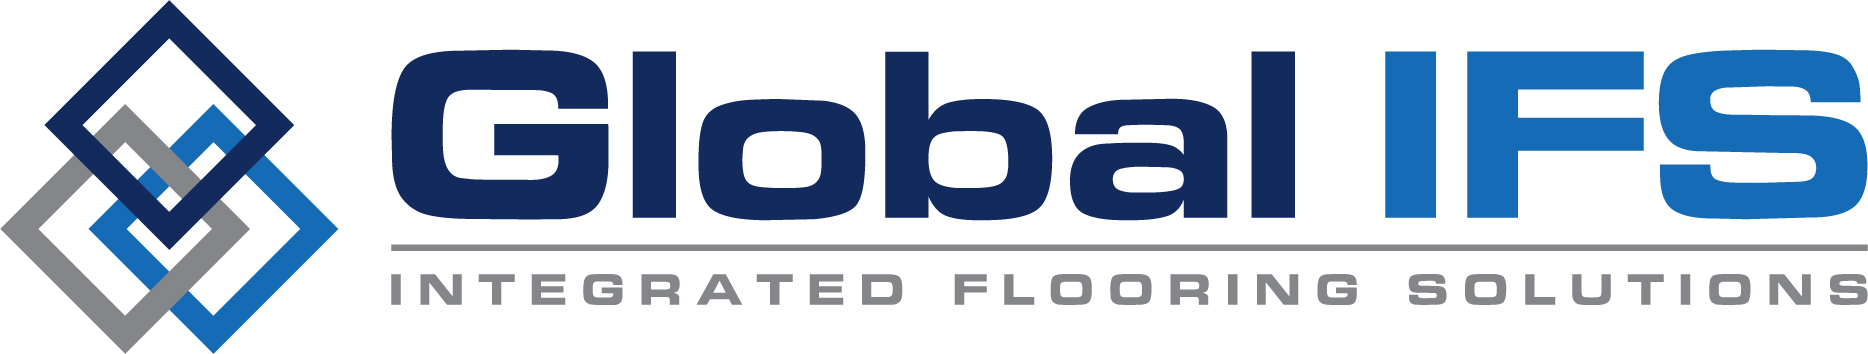 Global Integrated Flooring Solutions Announces Formation